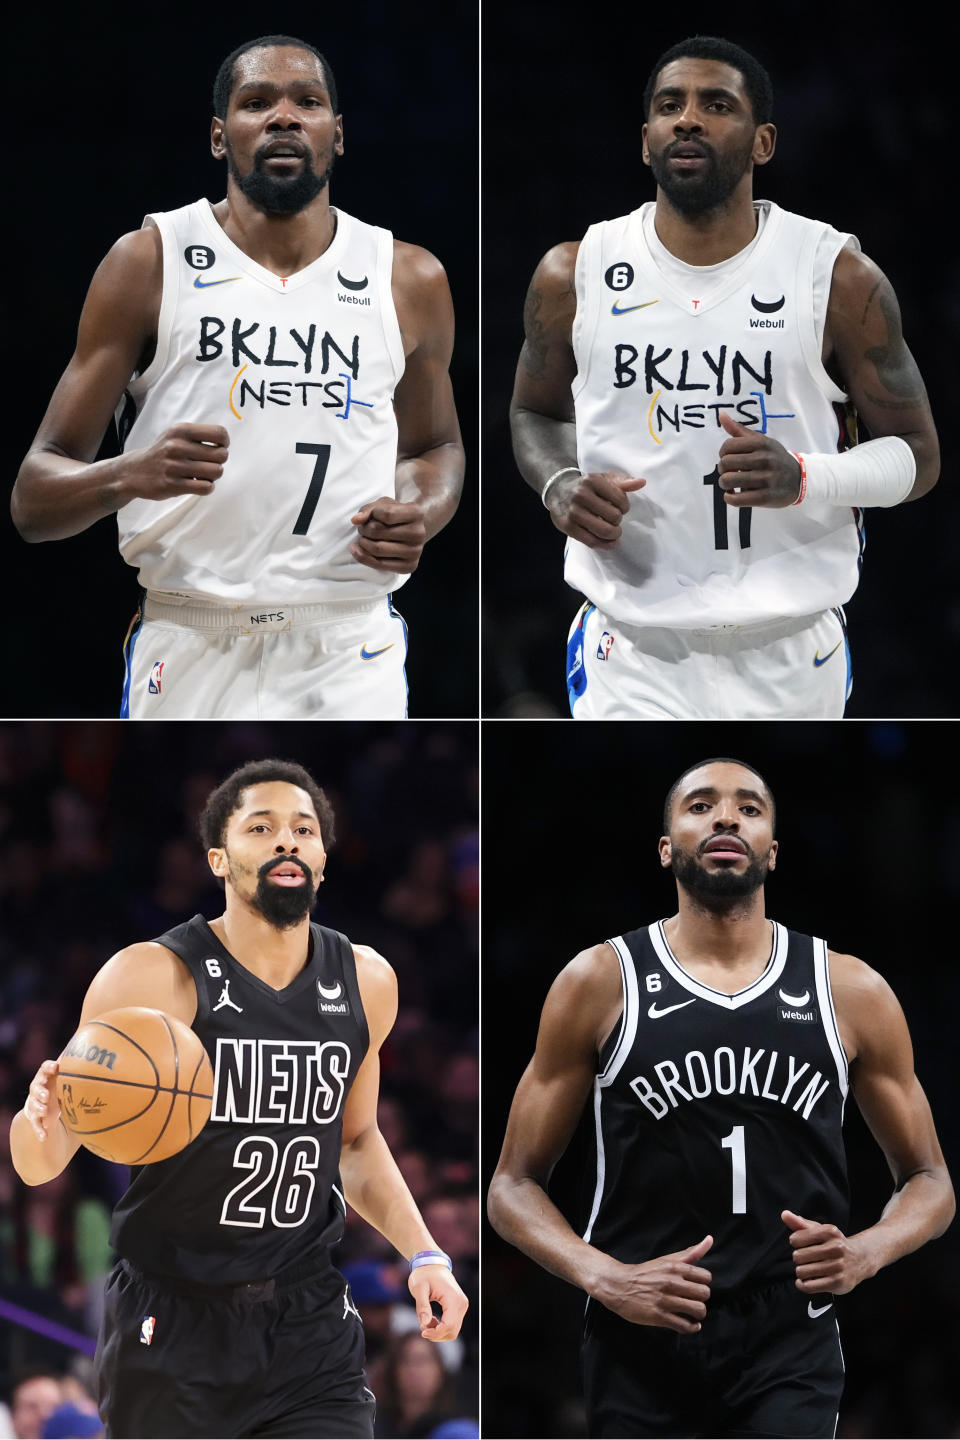 FILE - Then-Brooklyn Nets players Kevin Durant (7) and Kyrie Irving (11), and Brooklyn Nets' Spencer Dinwiddie (26) and Mikal Bridges (1), are shown during NBA basketball games in New York. When the Brooklyn Nets traded Kyrie Irving and then Kevin Durant, the drama that had engulfed the team went with them — along with any realistic title hopes for this season. (AP Photo/File)